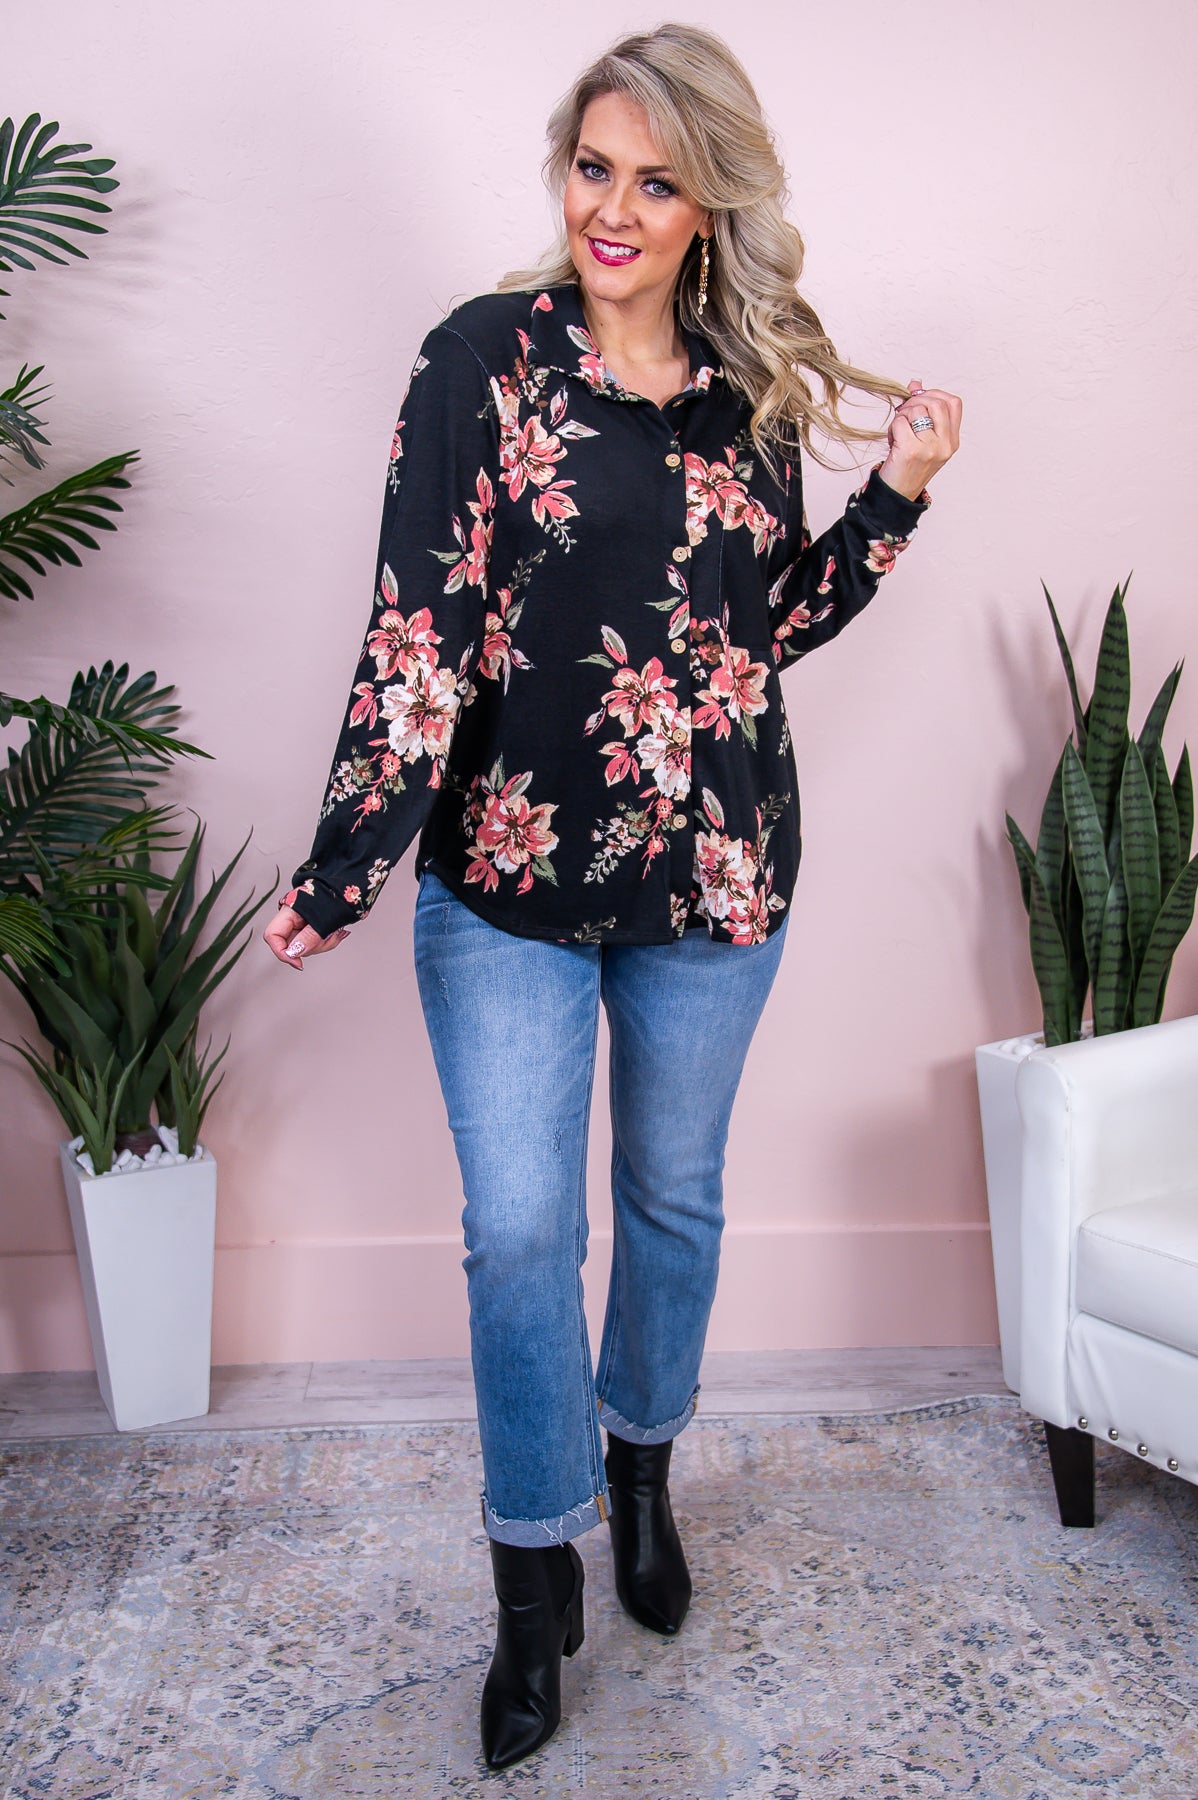 Shades Of Happiness Black/Multi Color Floral Top - T8482BK